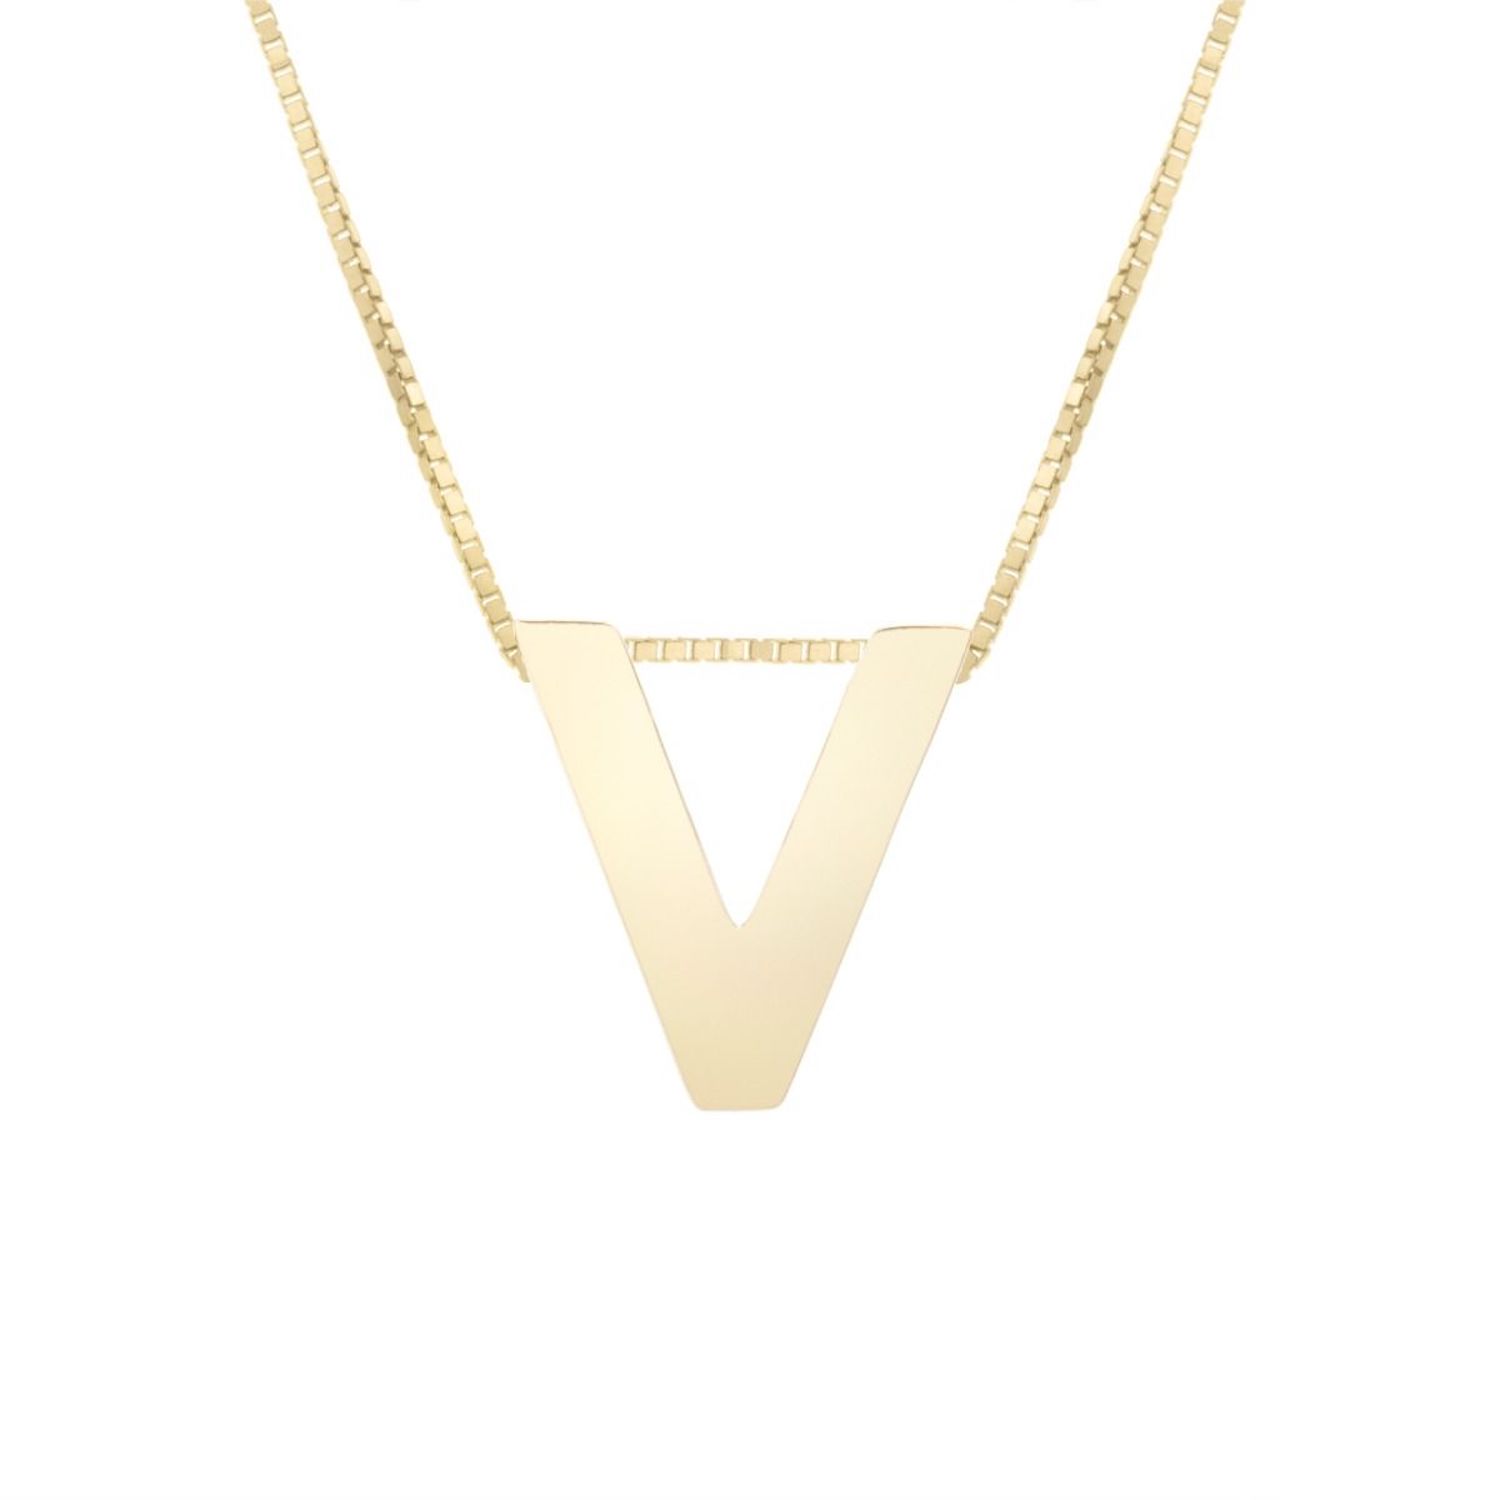 14K Yellow Gold Block Letter Initial Pendant Box Chain Necklace 16"-18" - V